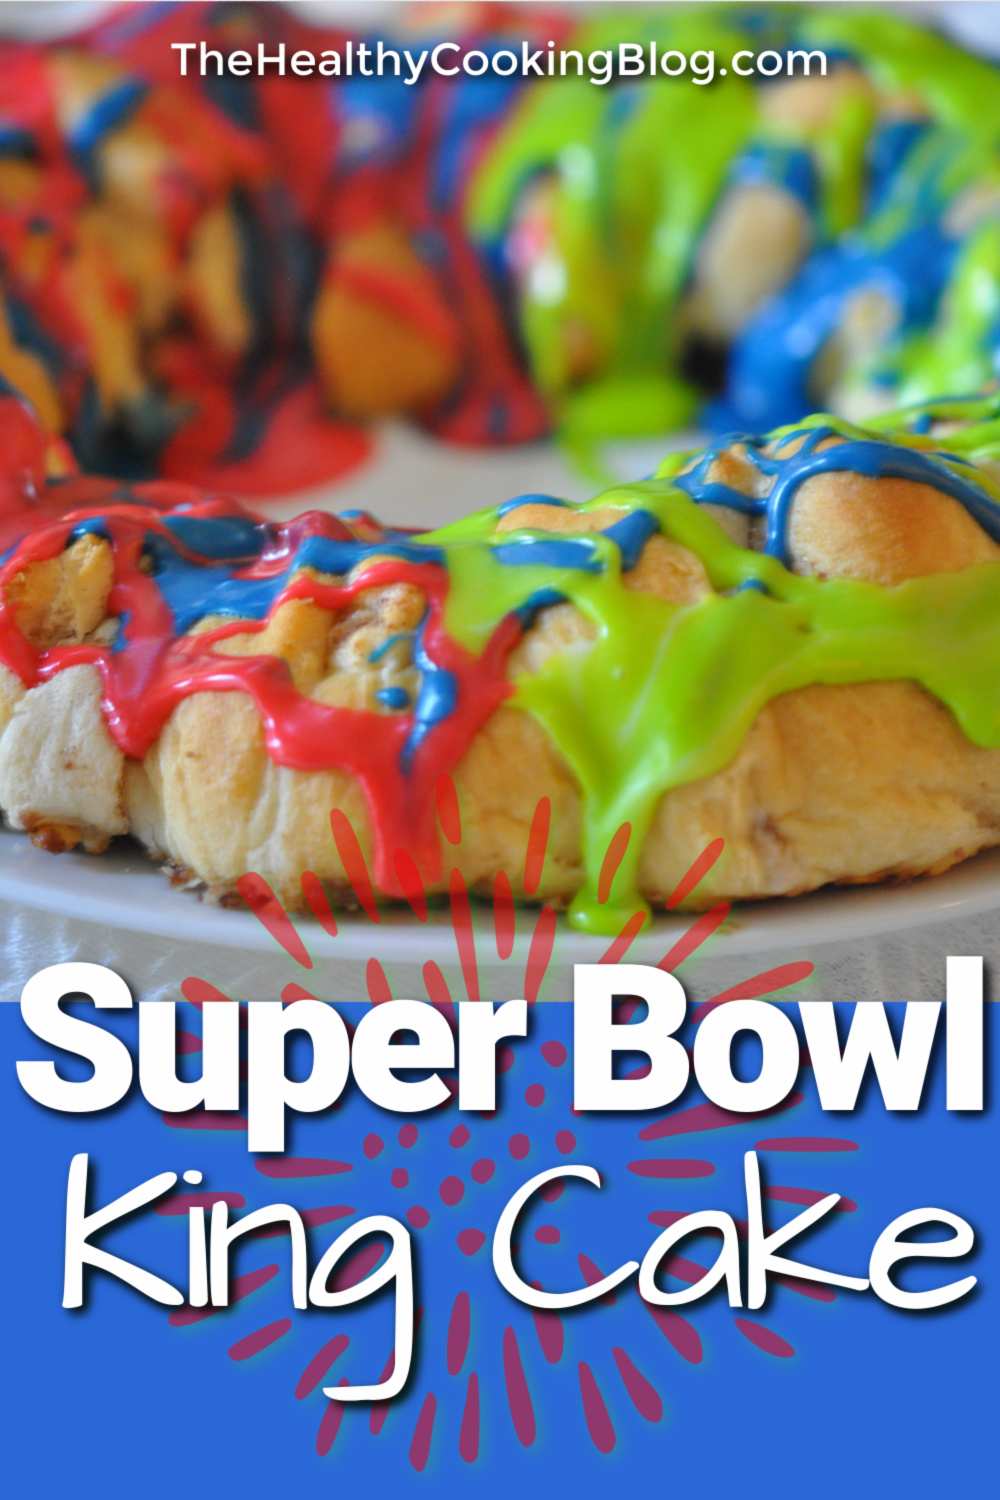 How To Make King Cake Recipe with Crescent Rolls - Easy King Cake